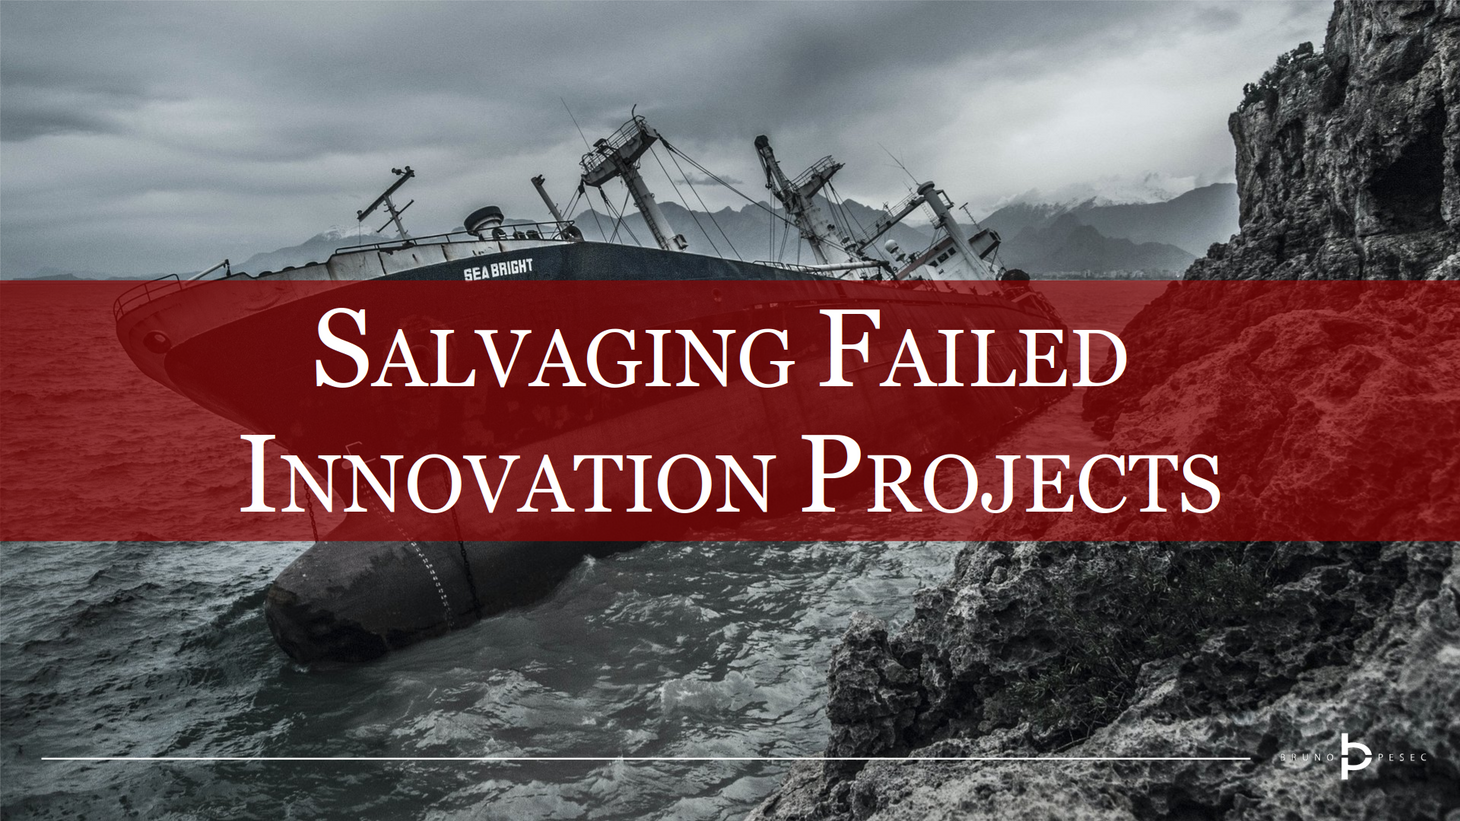 Salvaging failed innovation projects